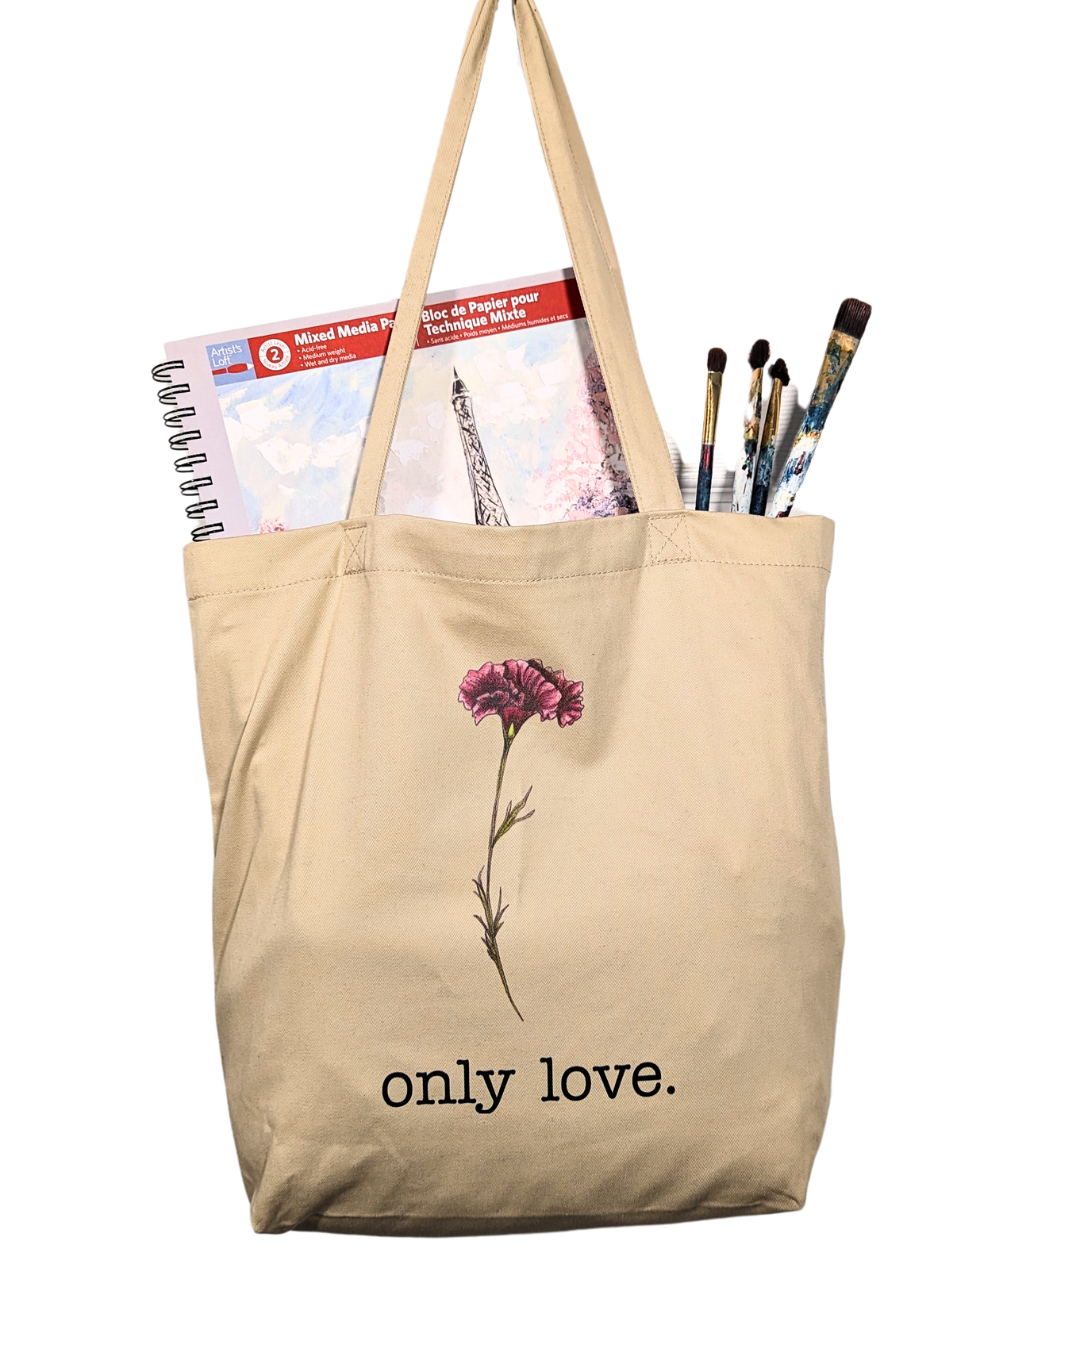 Only Love. pink carnation flower eco-friendly cotton tote bag with art supplies - with original artwork by Amy-Lynn Denham